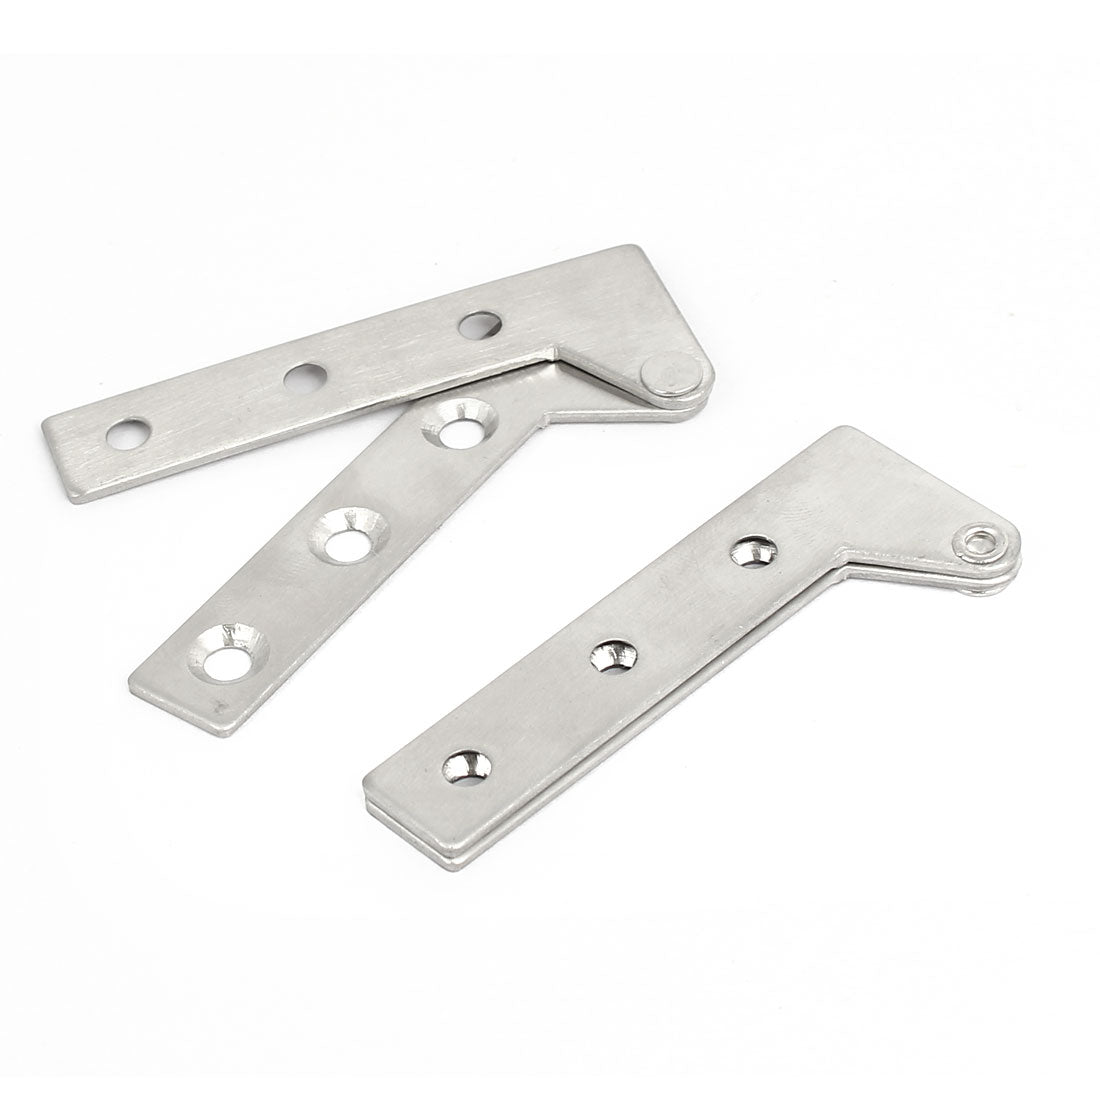 uxcell Uxcell 62mmx24mm 6 Holes 360 Degree Rotatable Door Pivot Hinges Silver Tone 2pcs